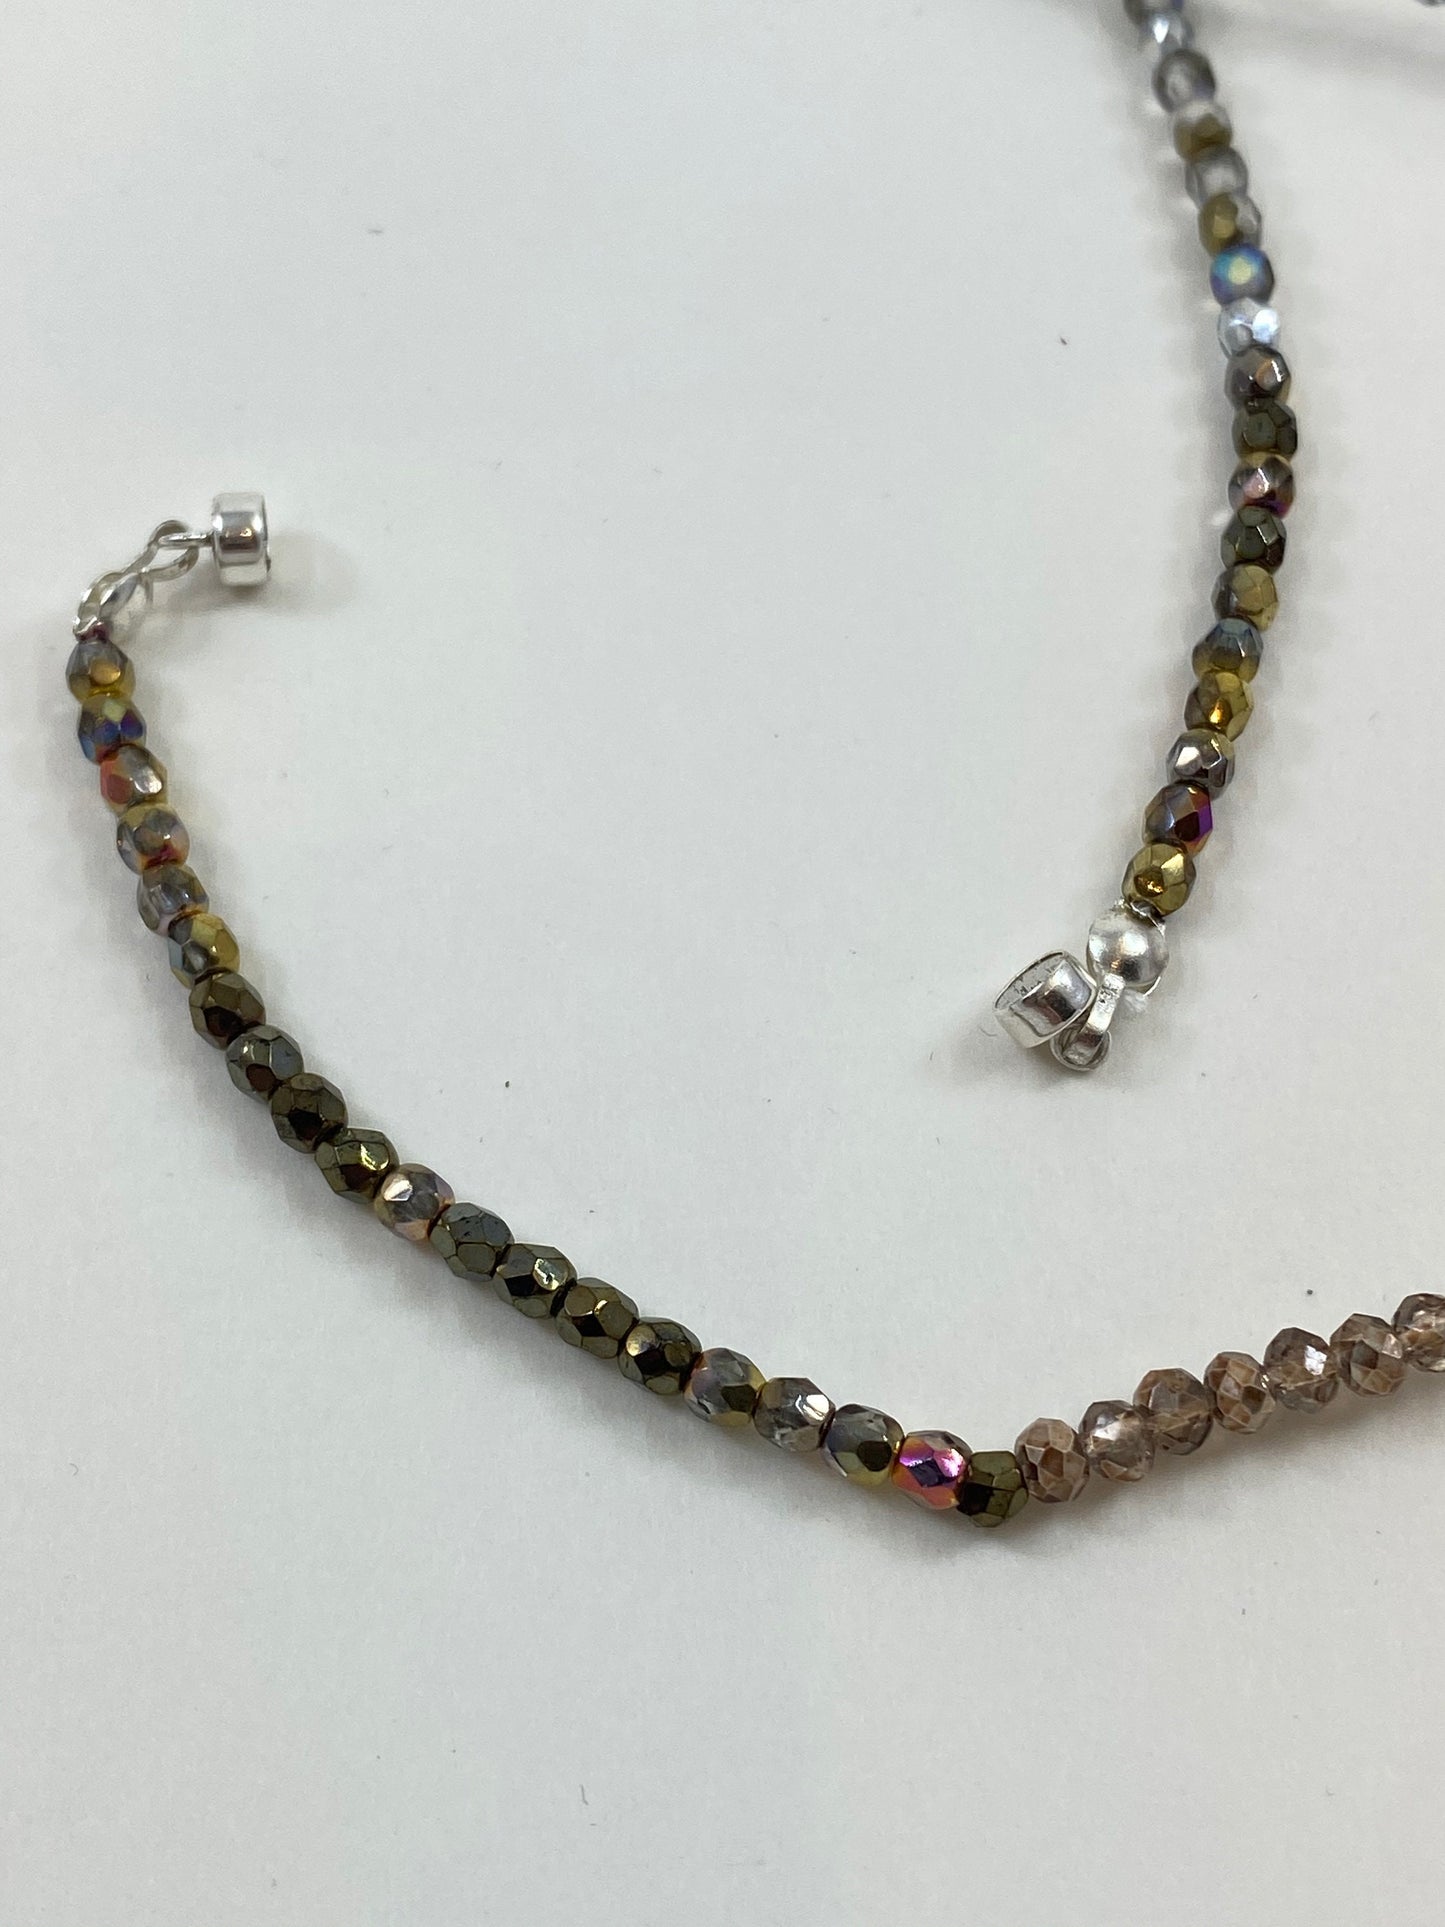 Stunning crystal necklace, with multi colors and designed to wear long or short. Finished with a quality sterling silver magnetic clasp.